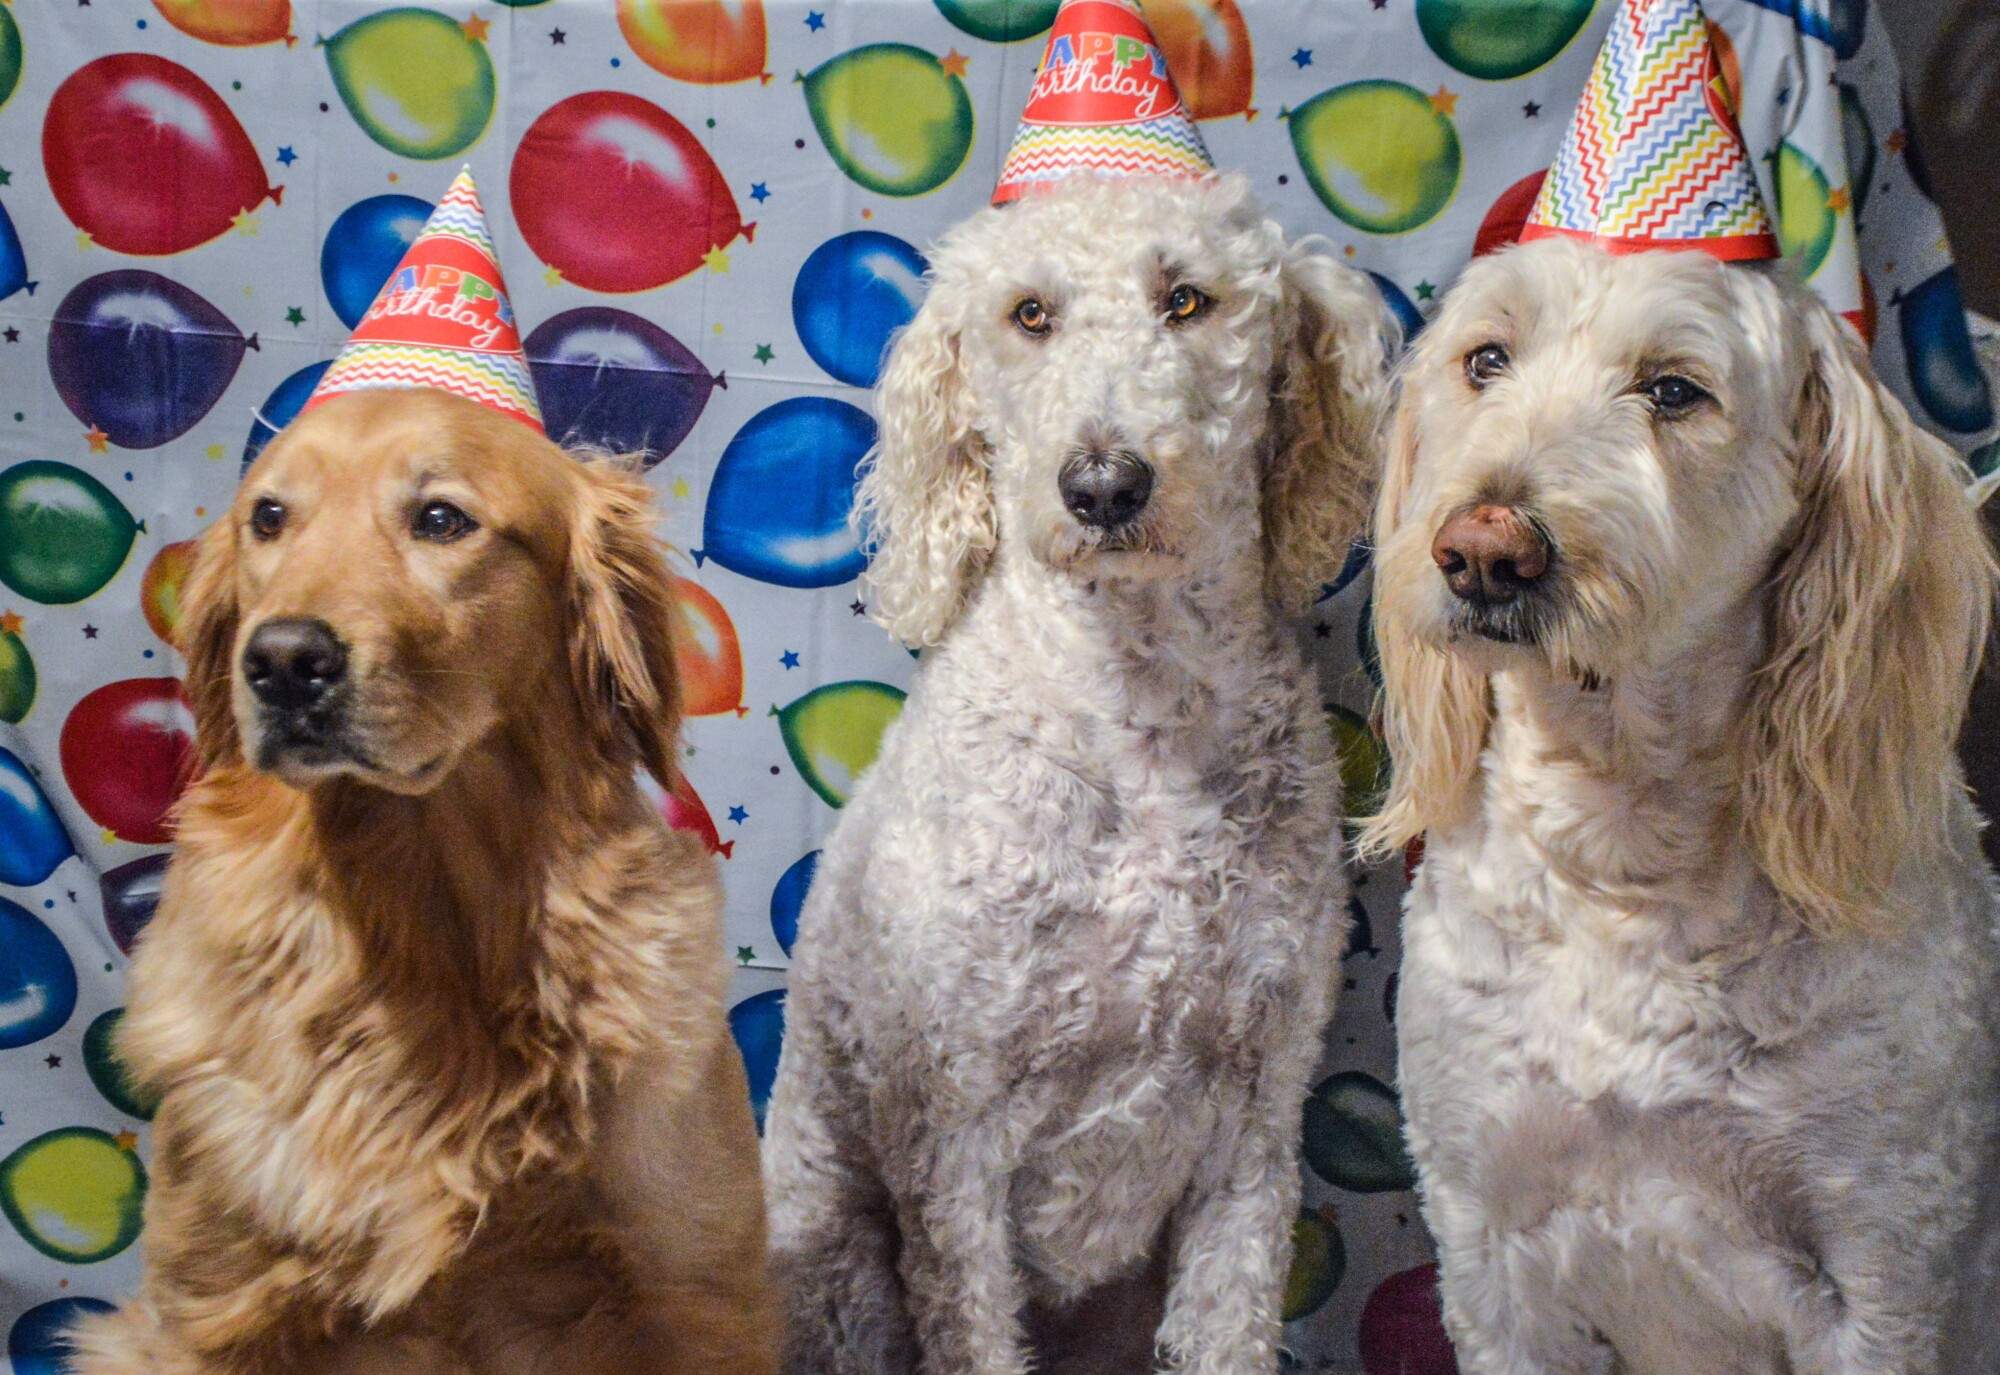 How to Throw the Perfect Dog Birthday Party